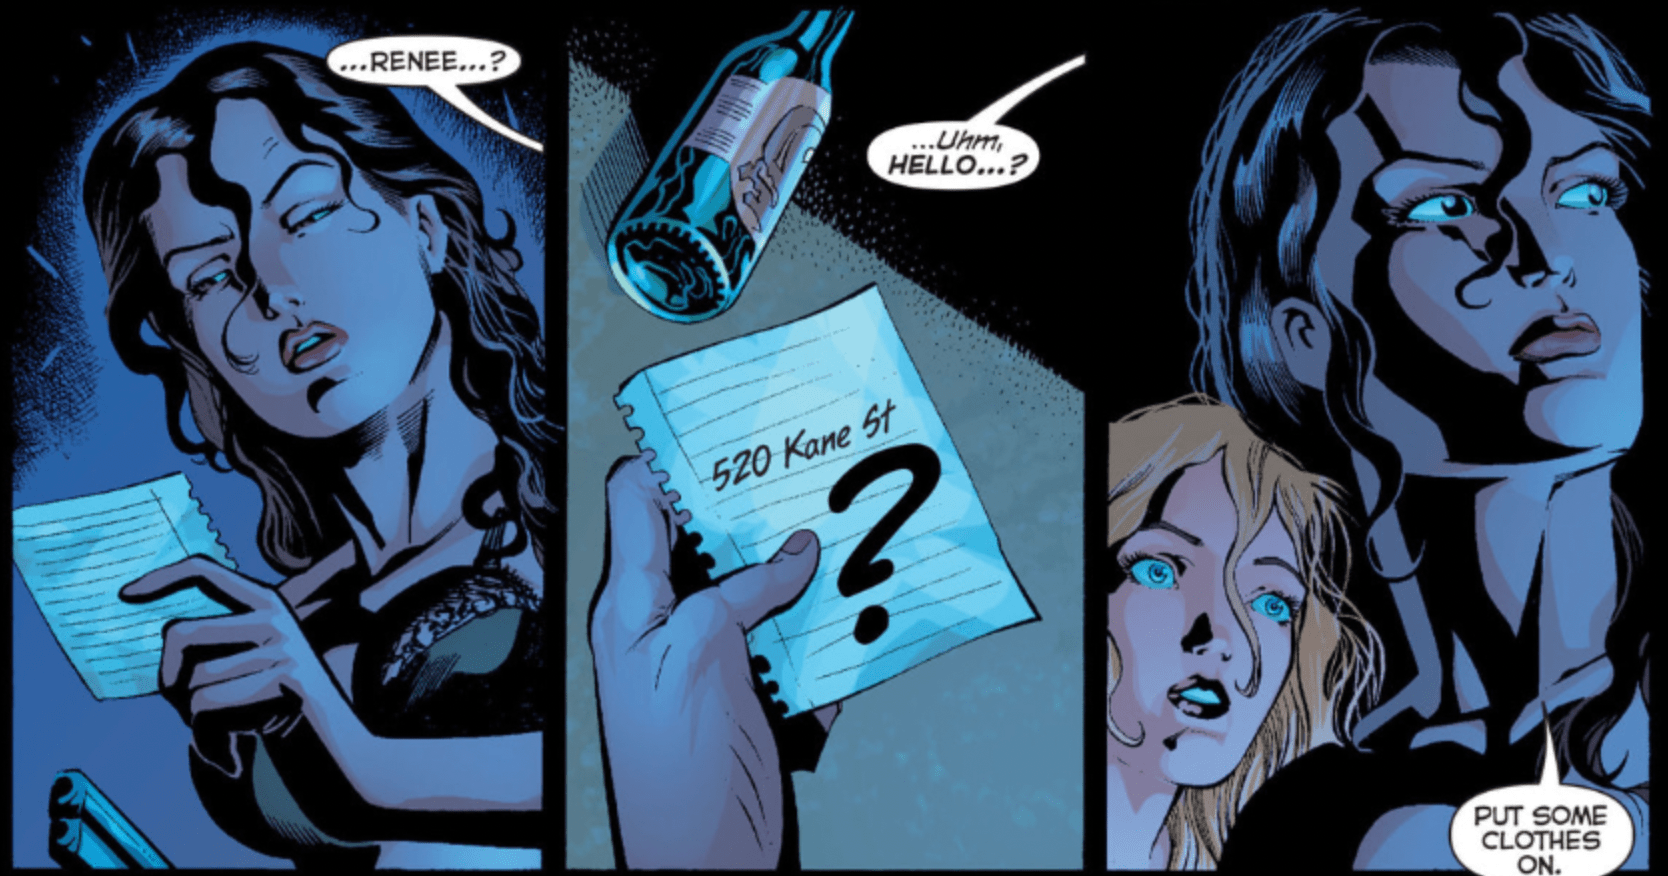 A screenshot from 52 featuring renee montoya telling her lover to put some clothes on